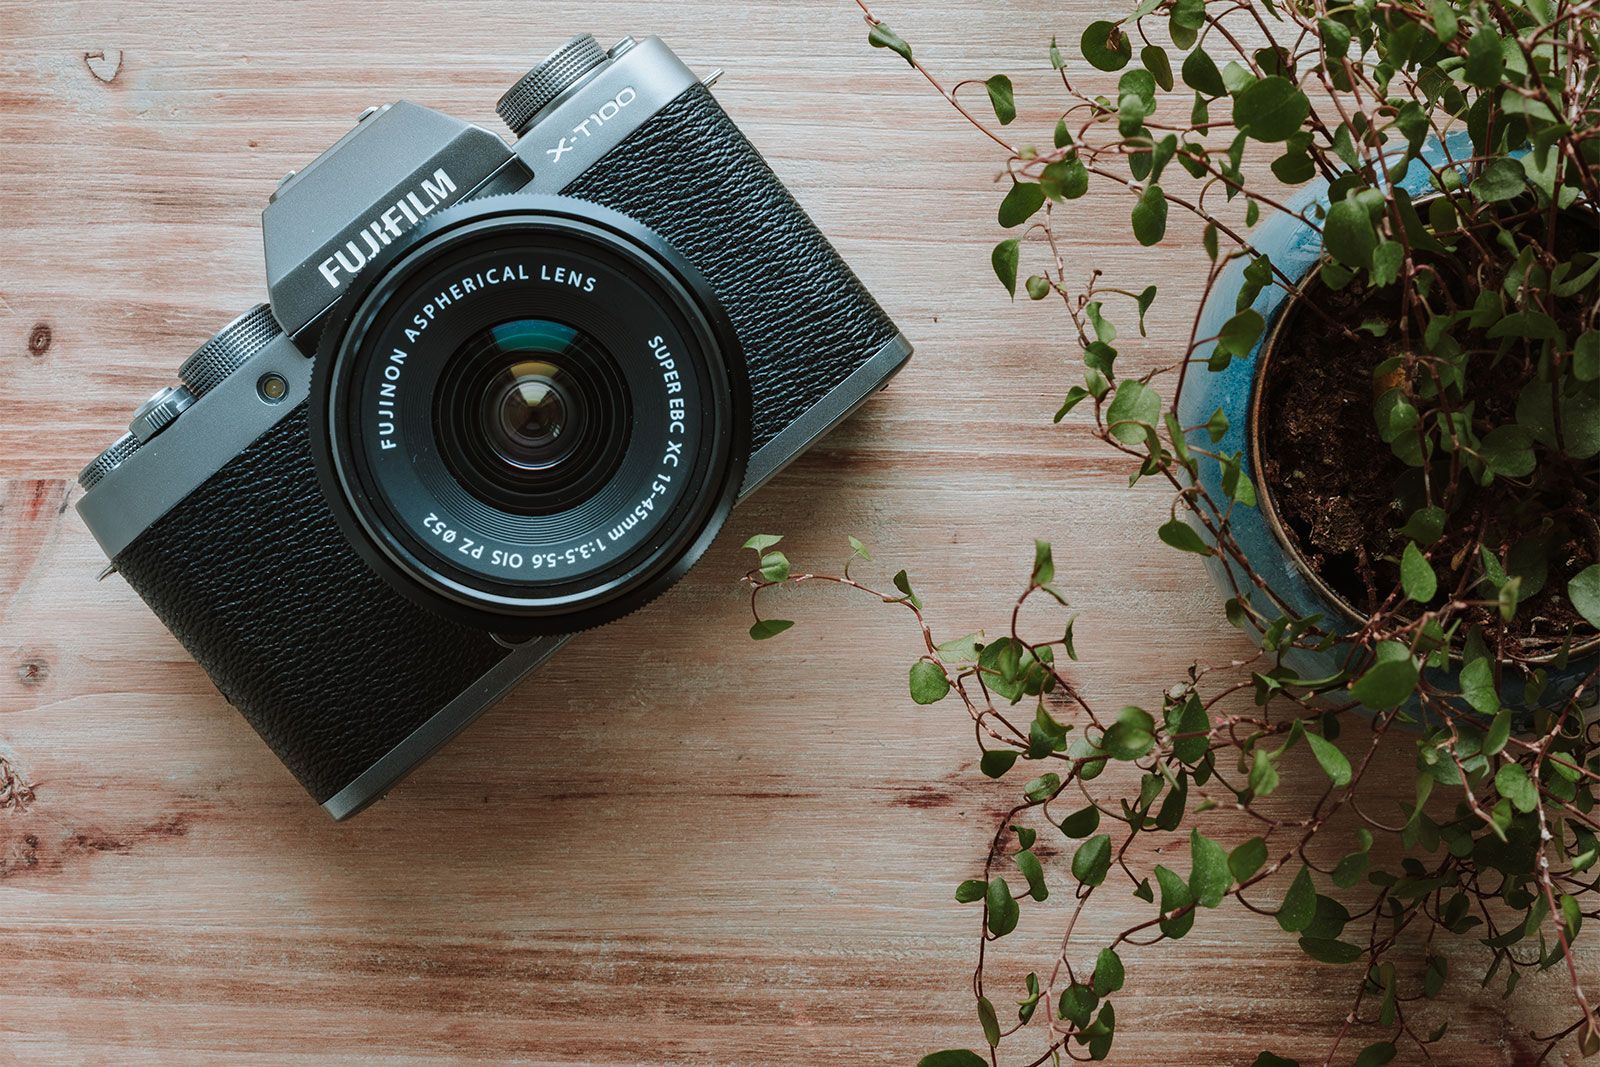 Fujifilm X-T100 combines powerful photography skills and retro looks in an affordable package image 1